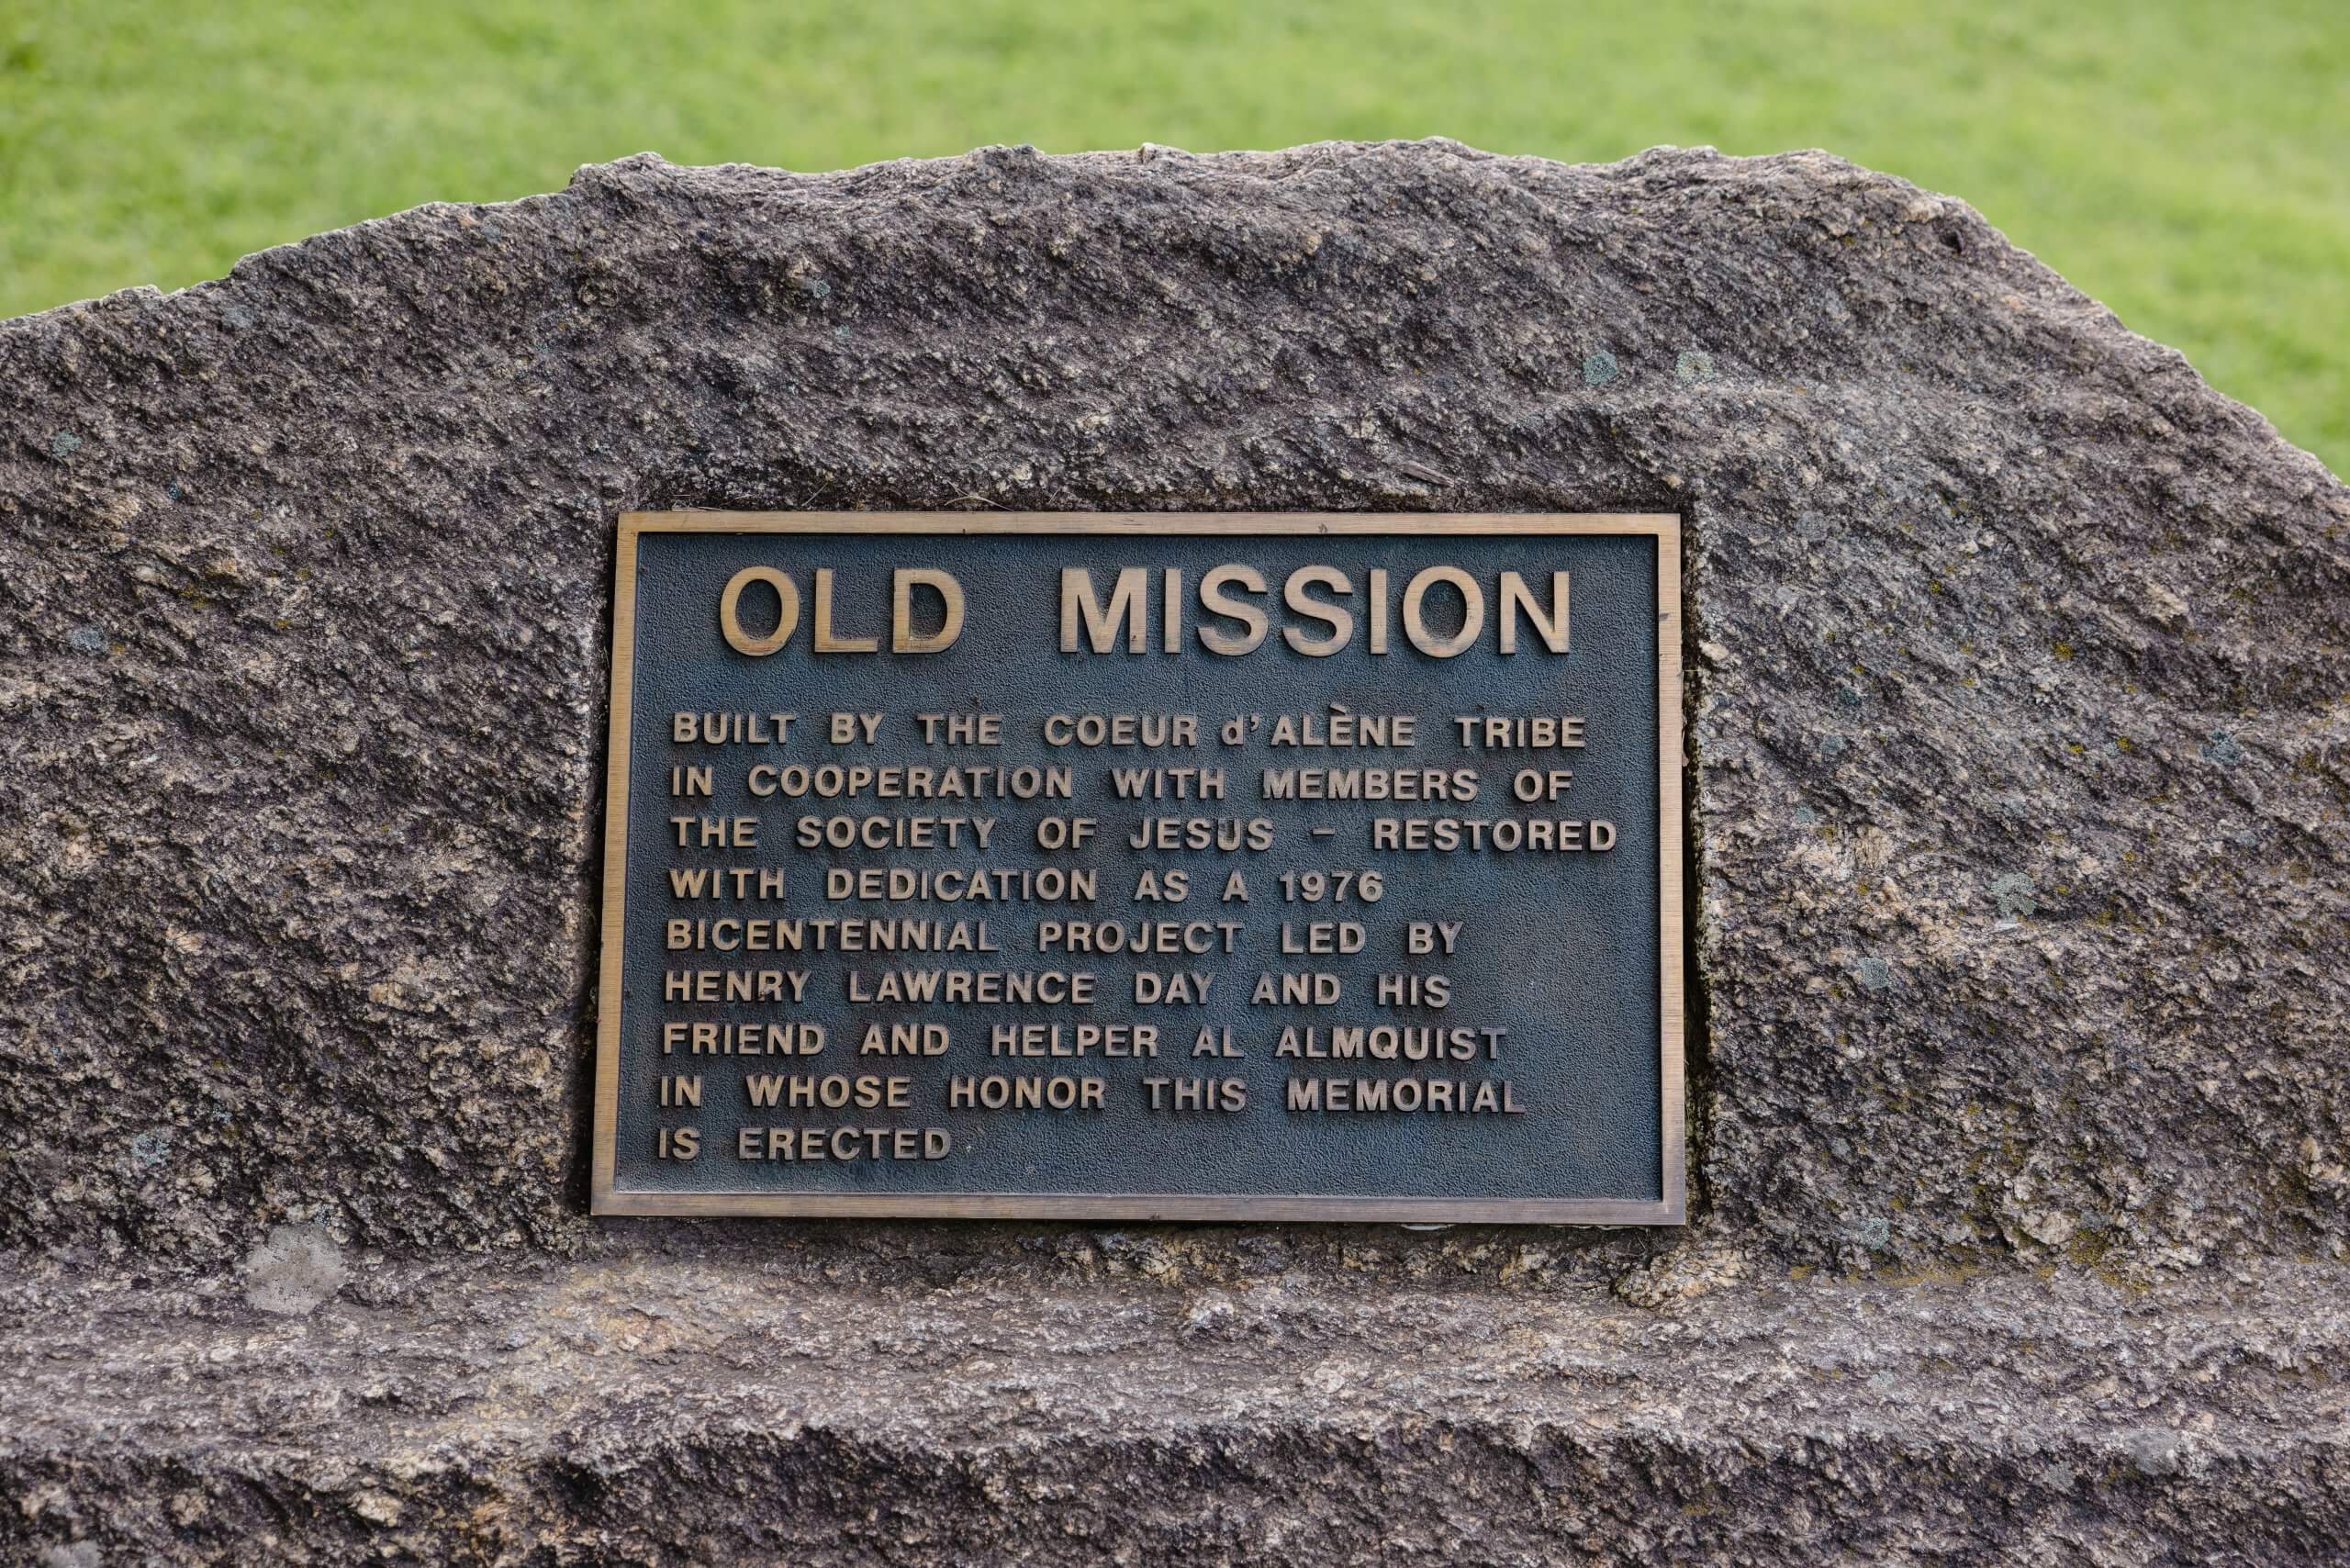 Old Mission plaque set in stone at Cataldo Mission.